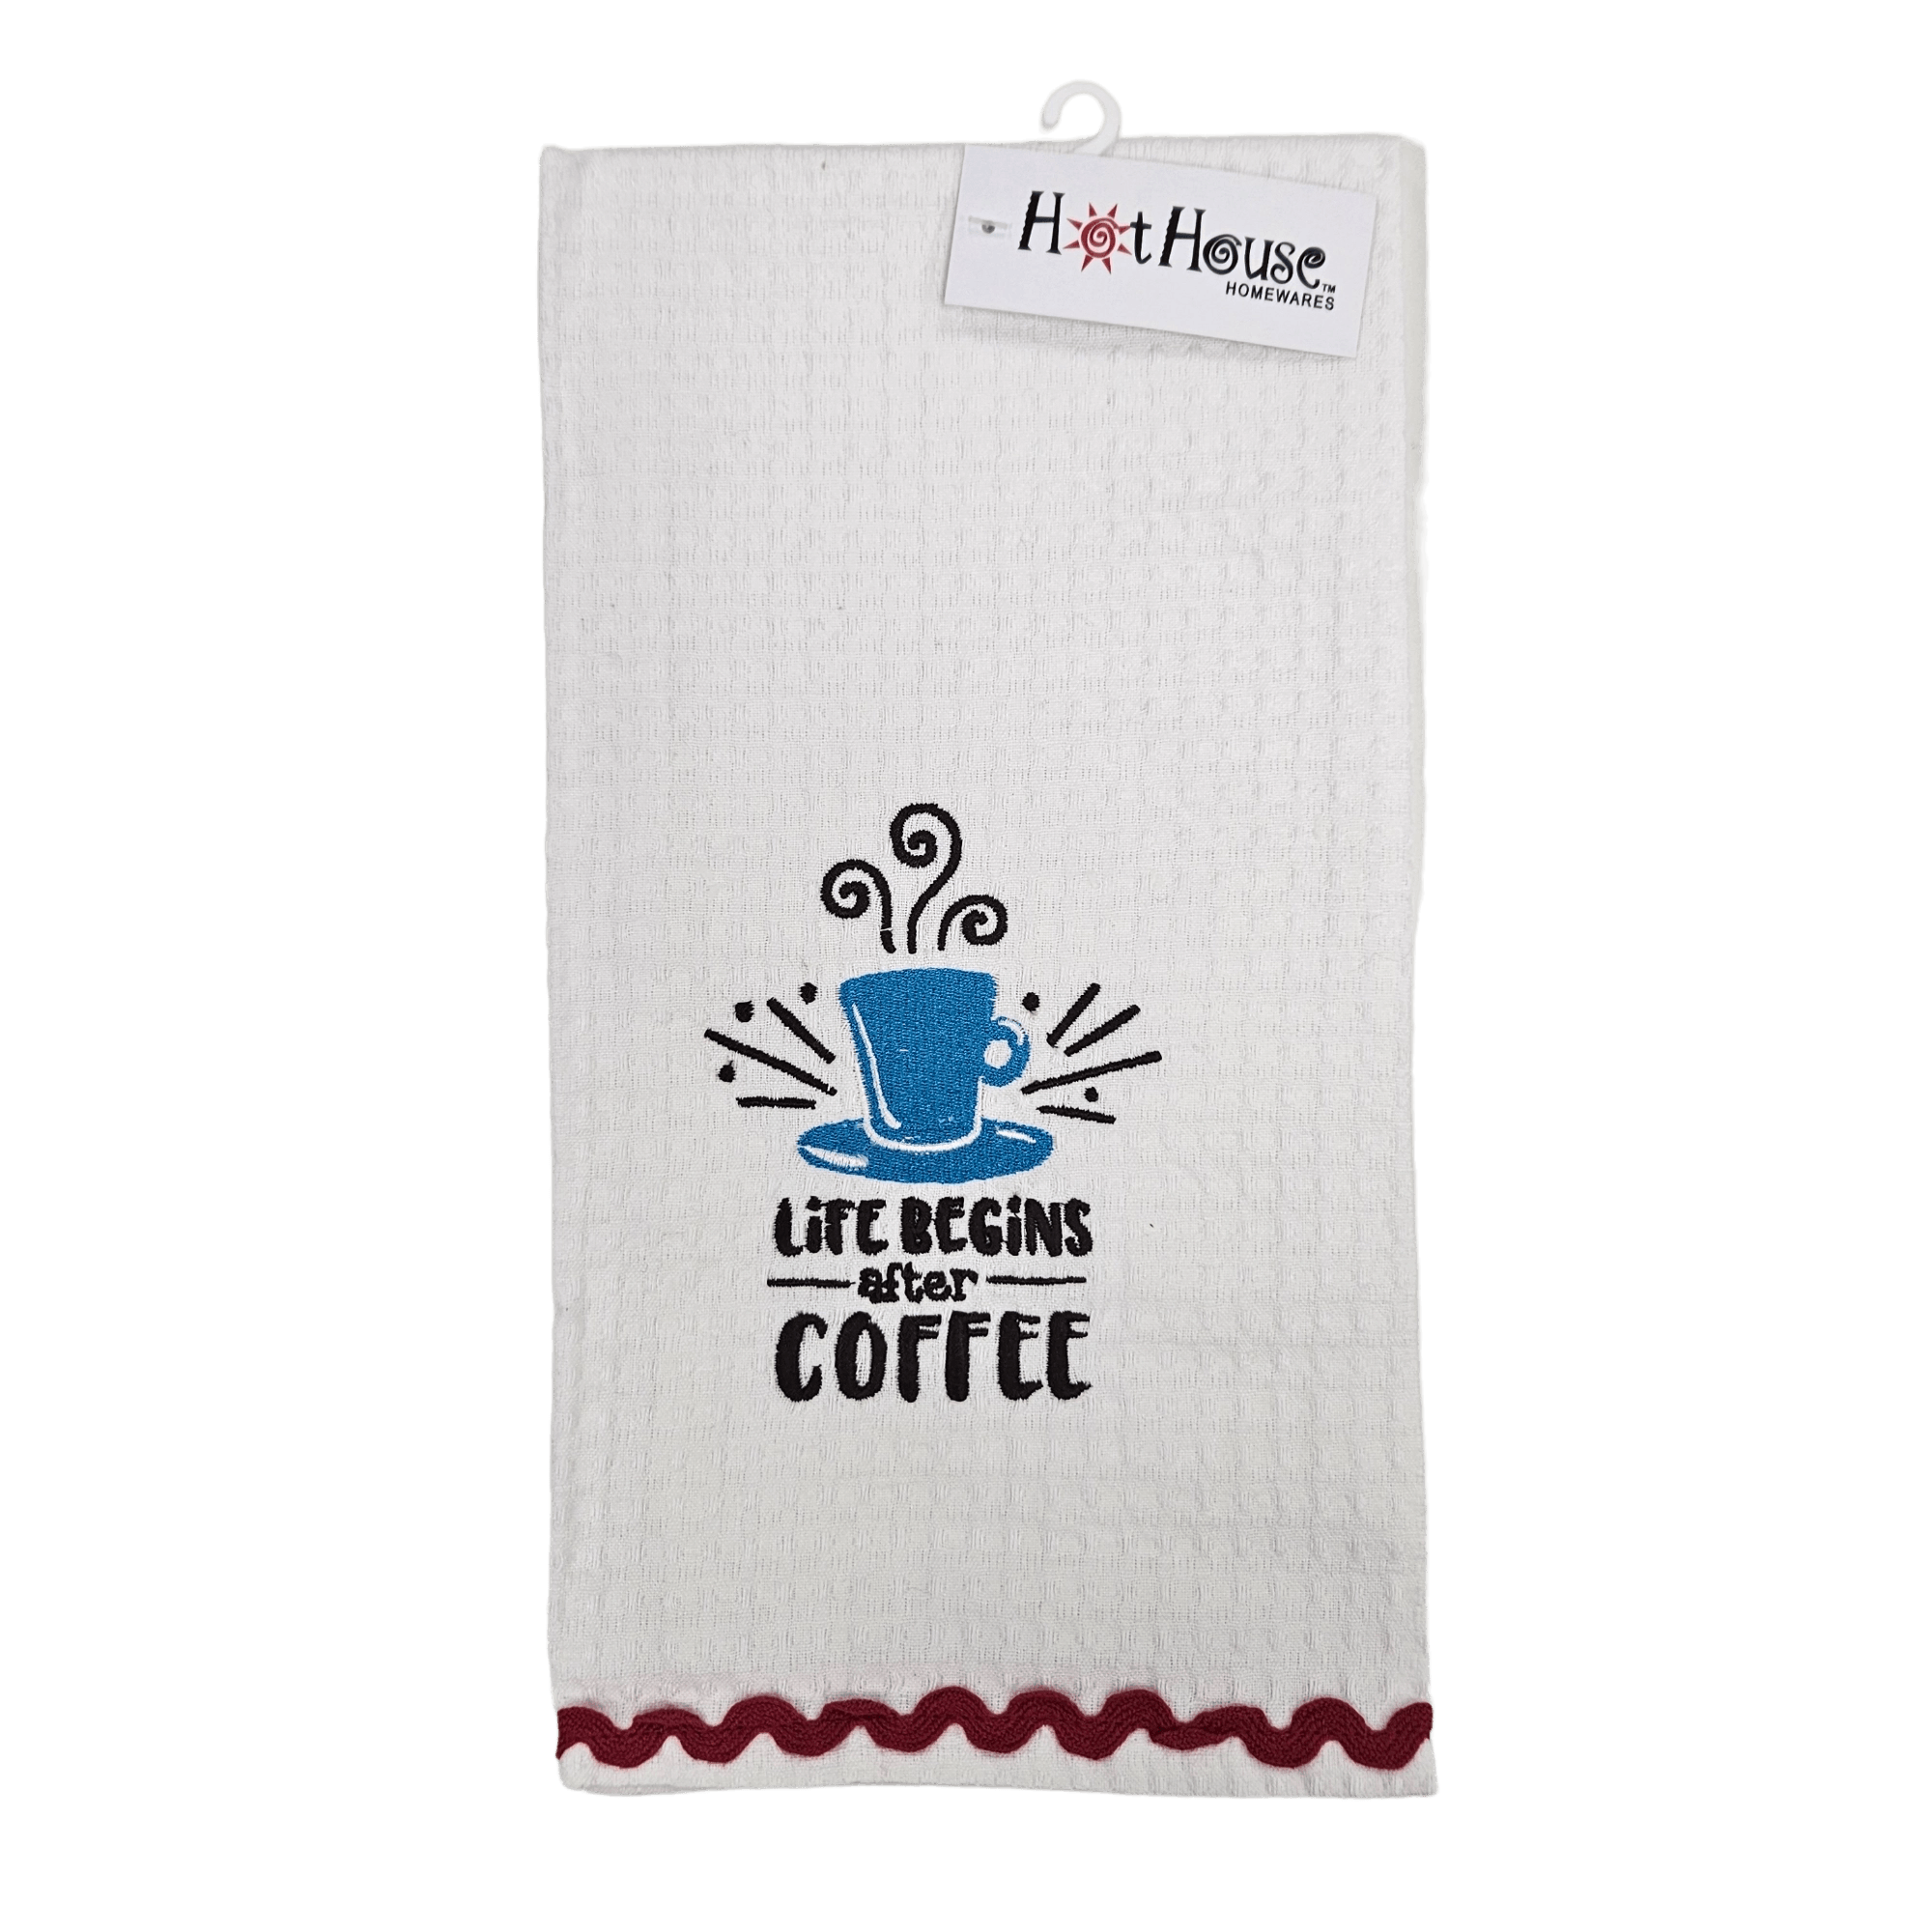 Life begins after coffee tea towel - Beautiful Gifts - Packaged with Love